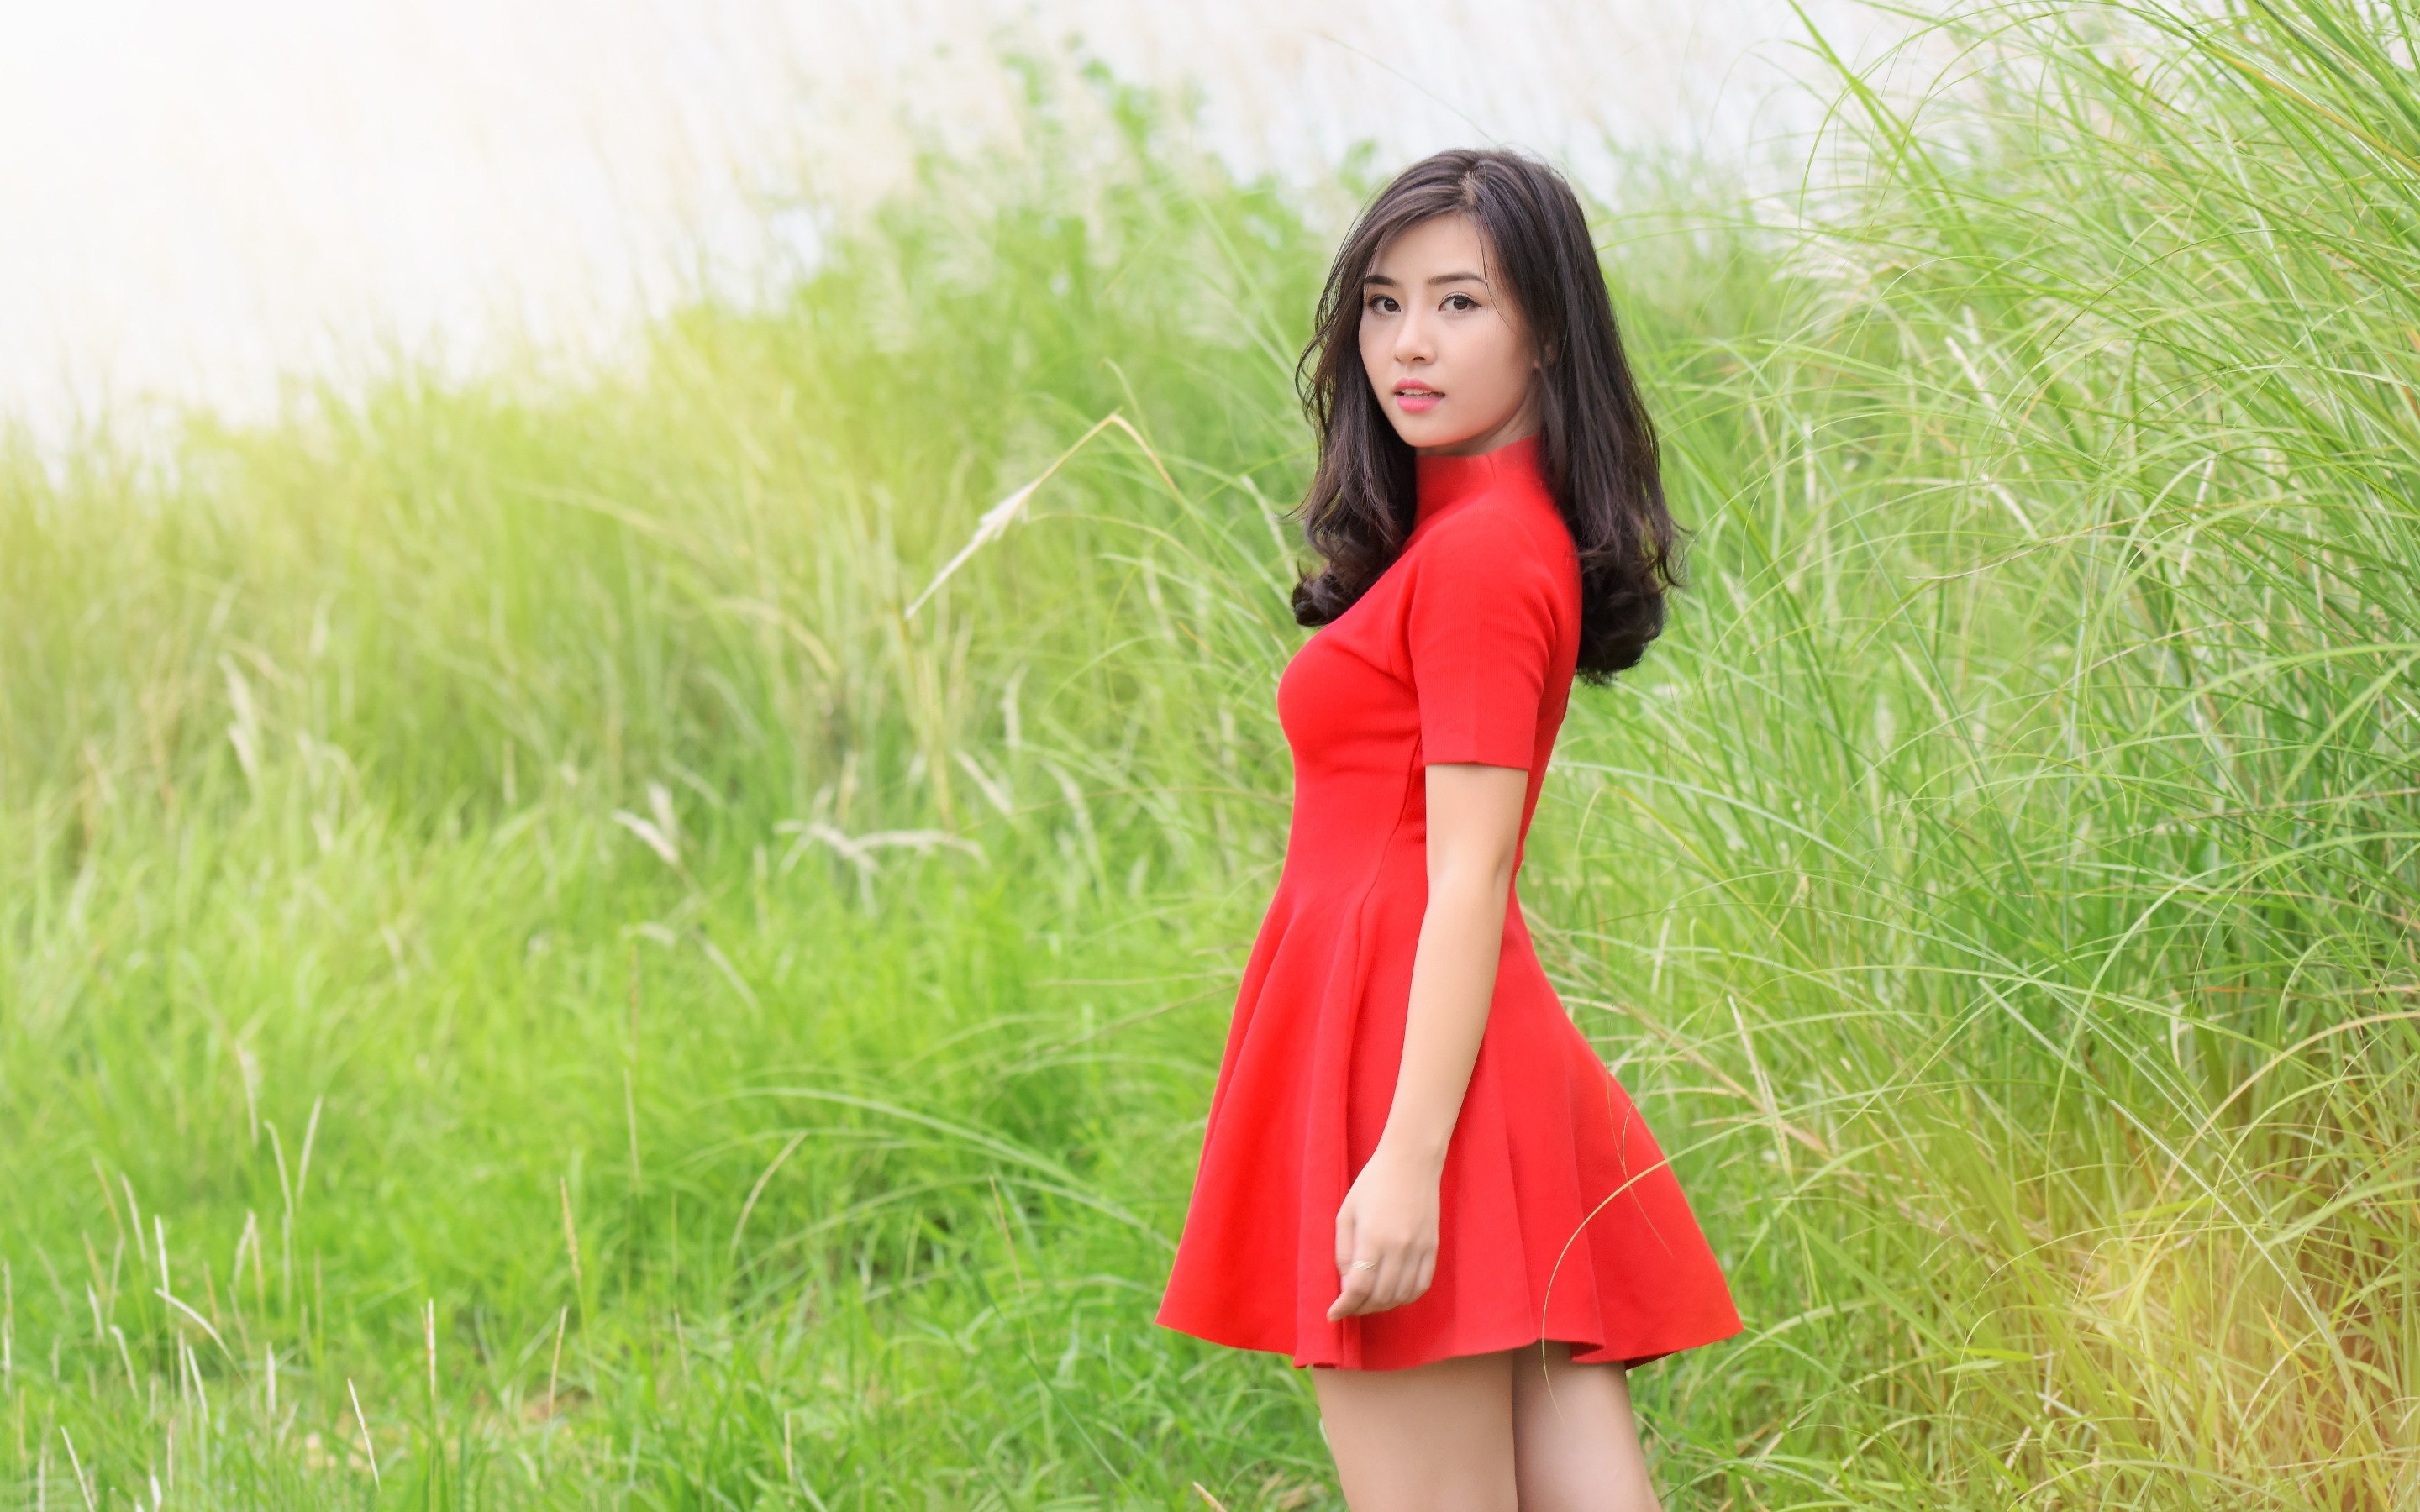 GoodFon.com - Free Wallpapers, download. summer, look, girl, red, dress, le...